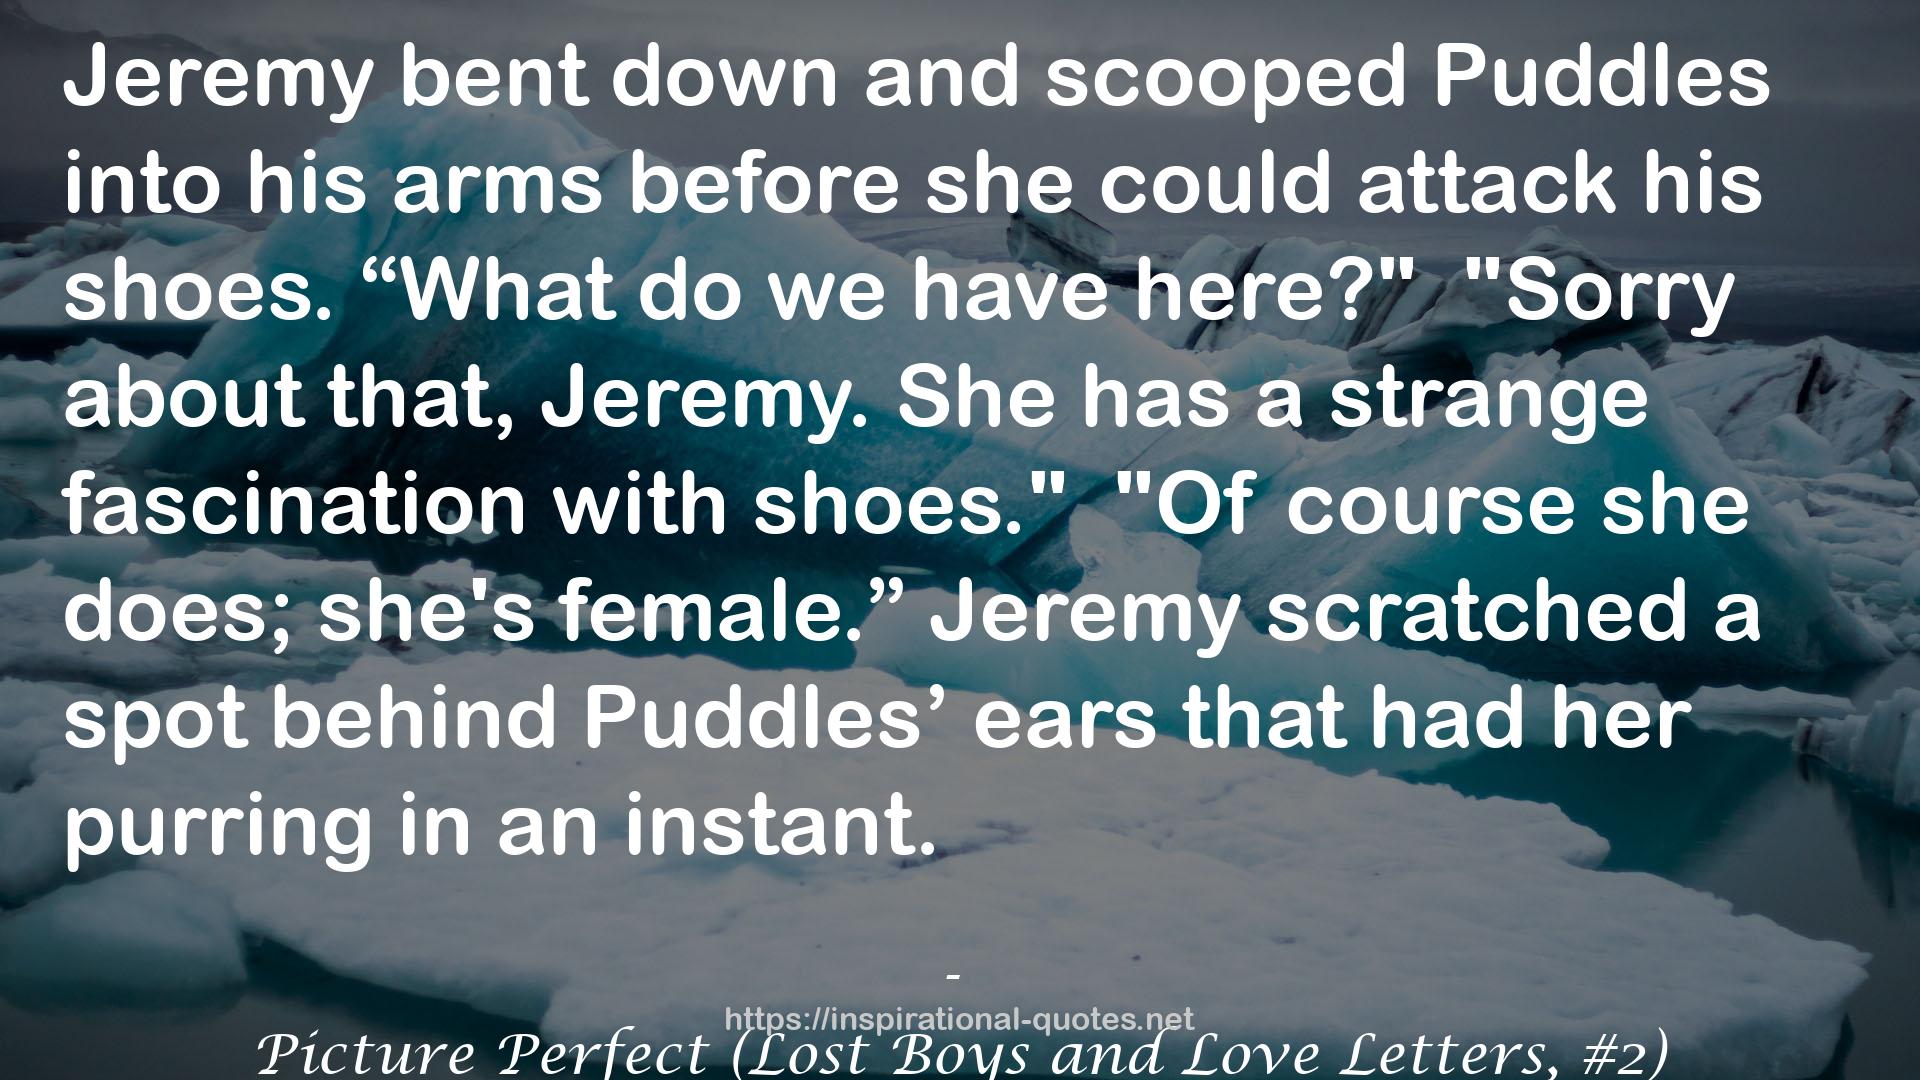 Picture Perfect (Lost Boys and Love Letters, #2) QUOTES